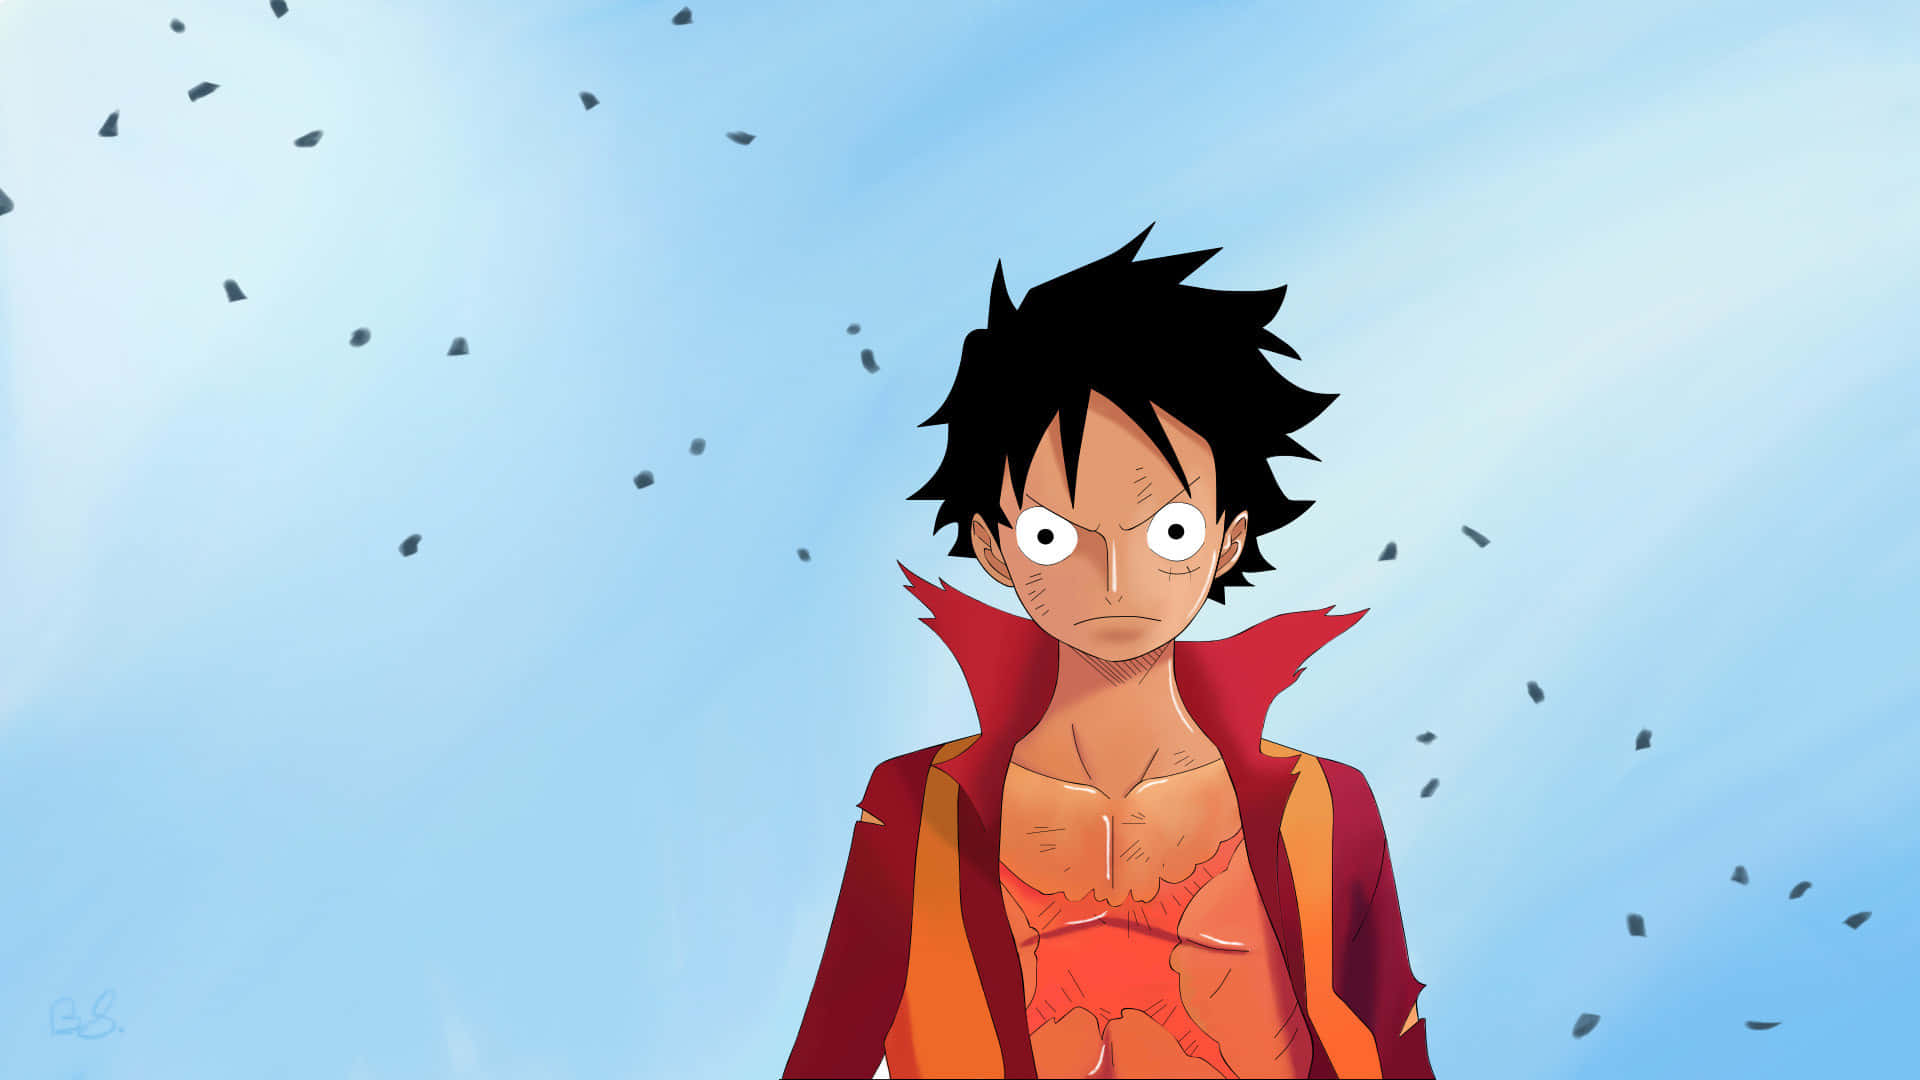 Luffy in the Ace of Spades